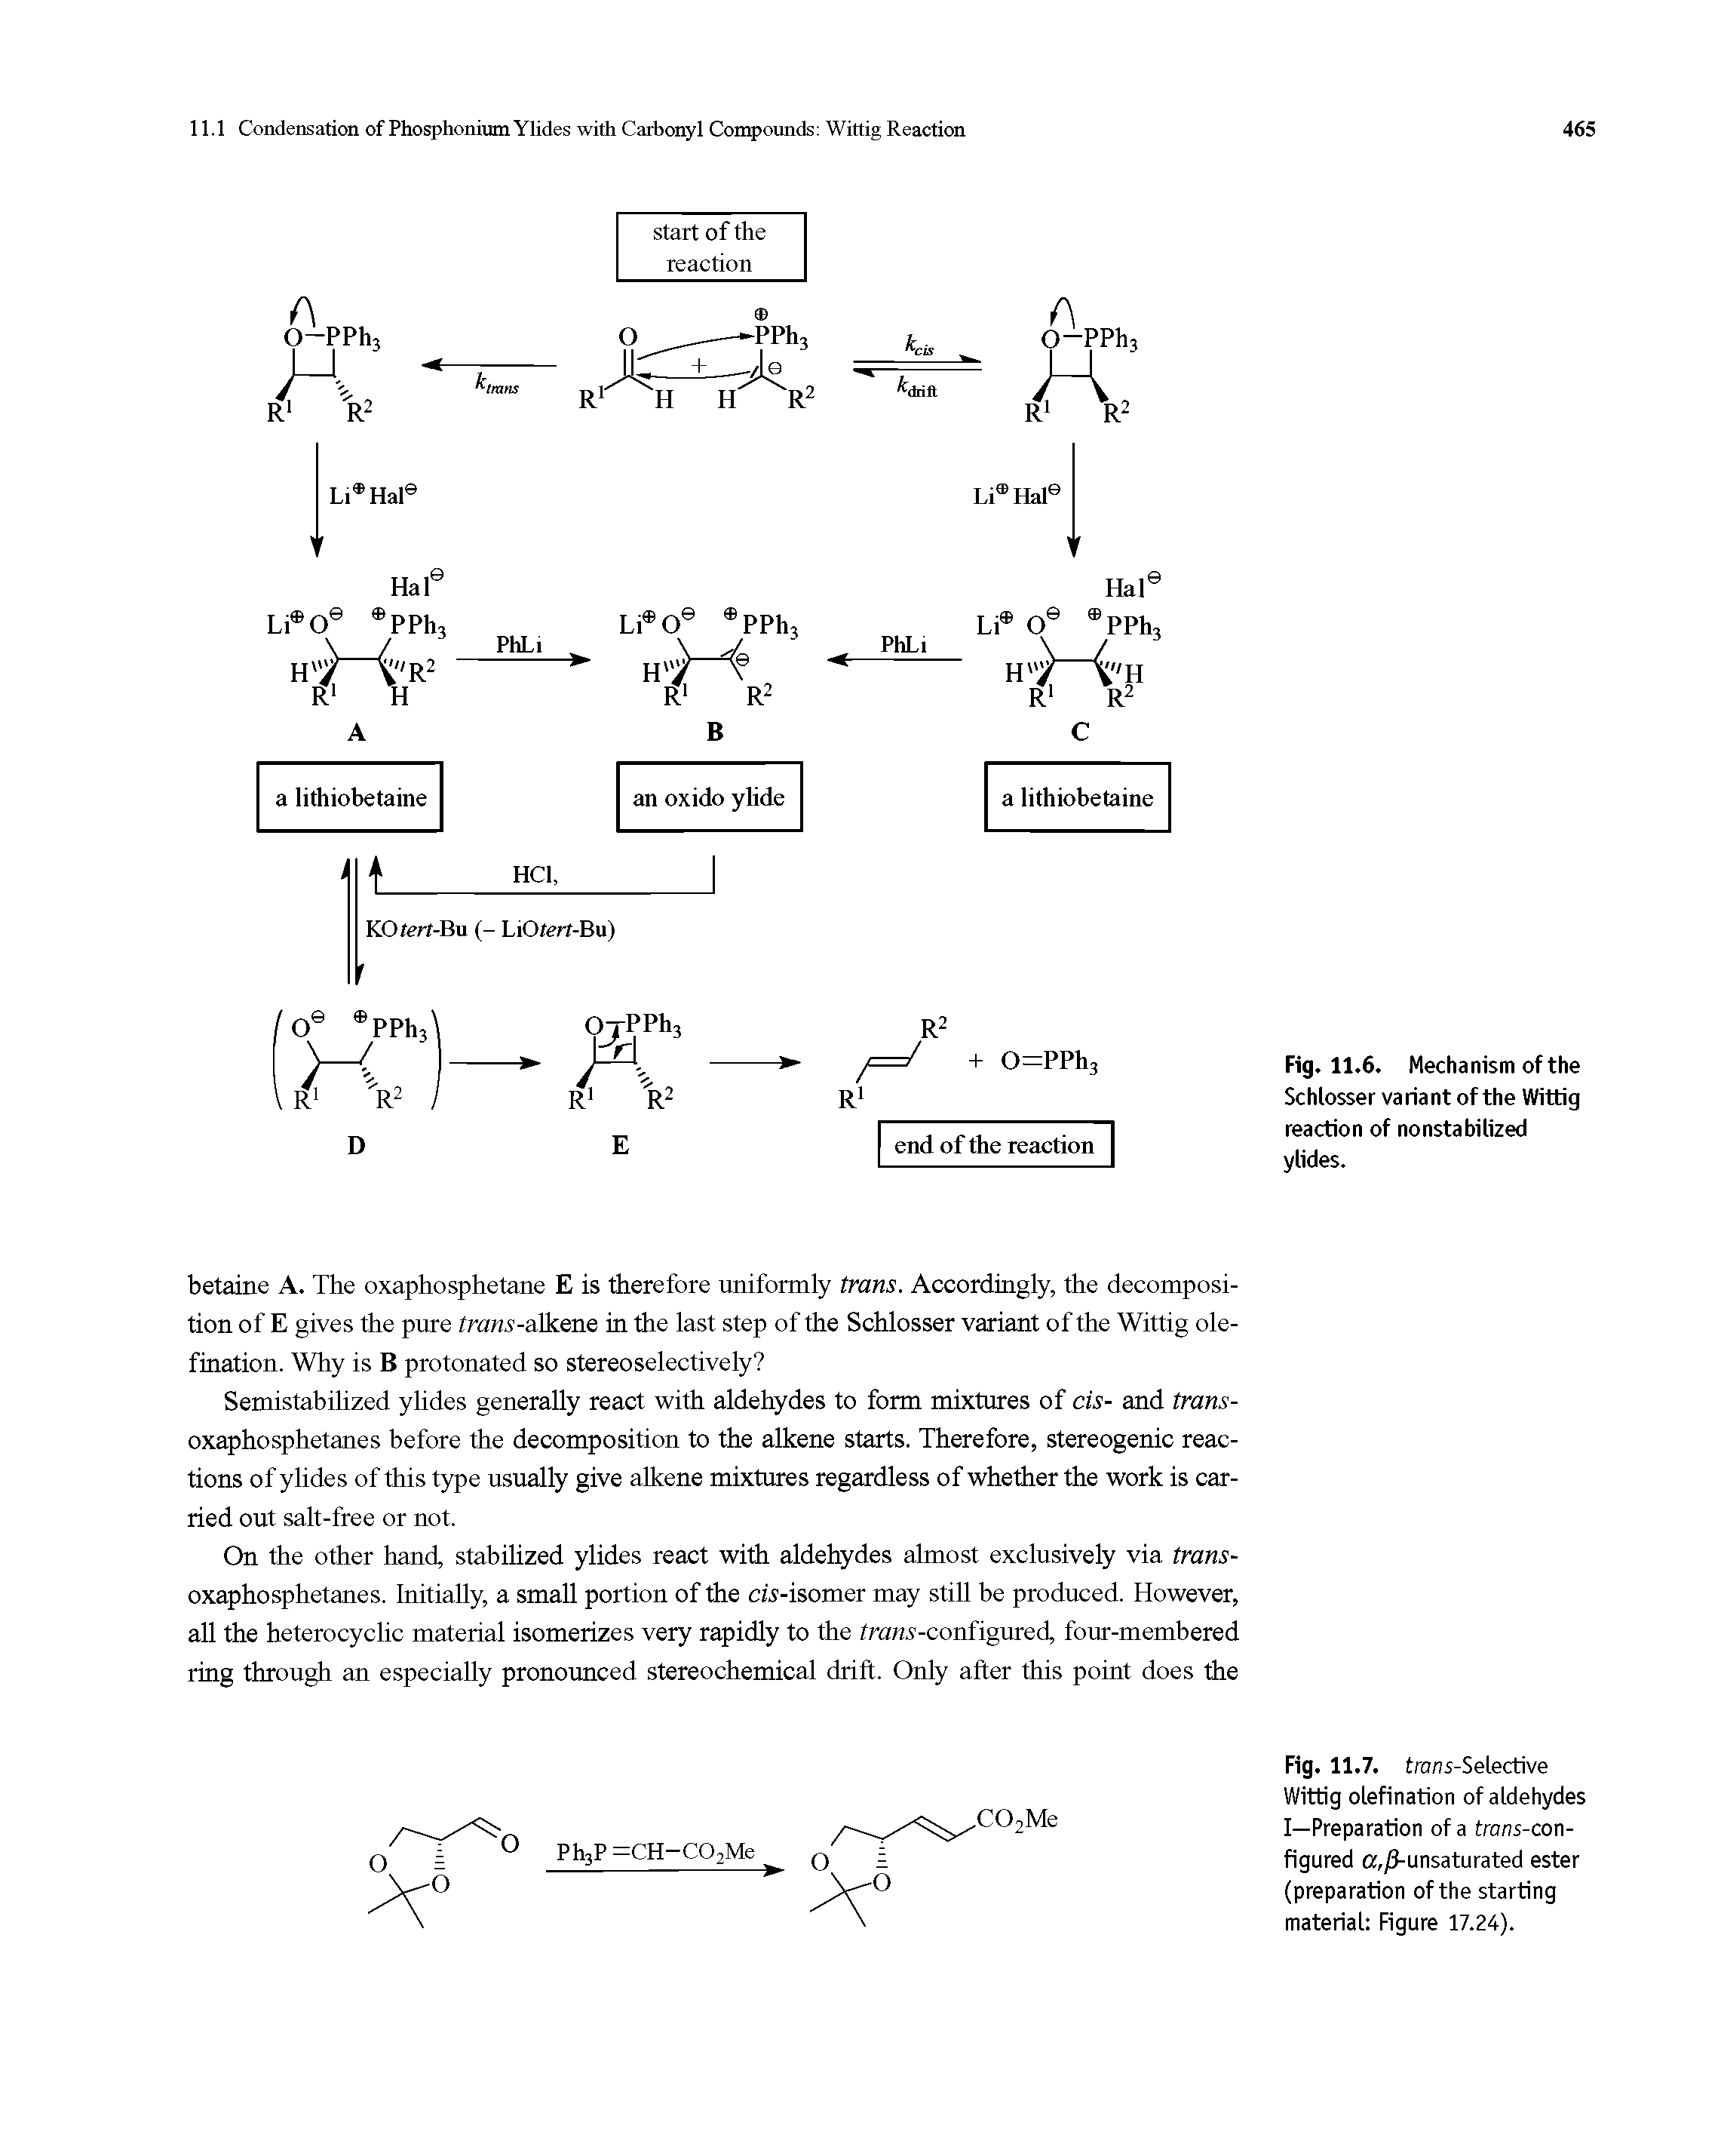 Fig. 11.6. Mechanism of the Schlosser variant of the Wittig reaction of nonstabilized ylides.